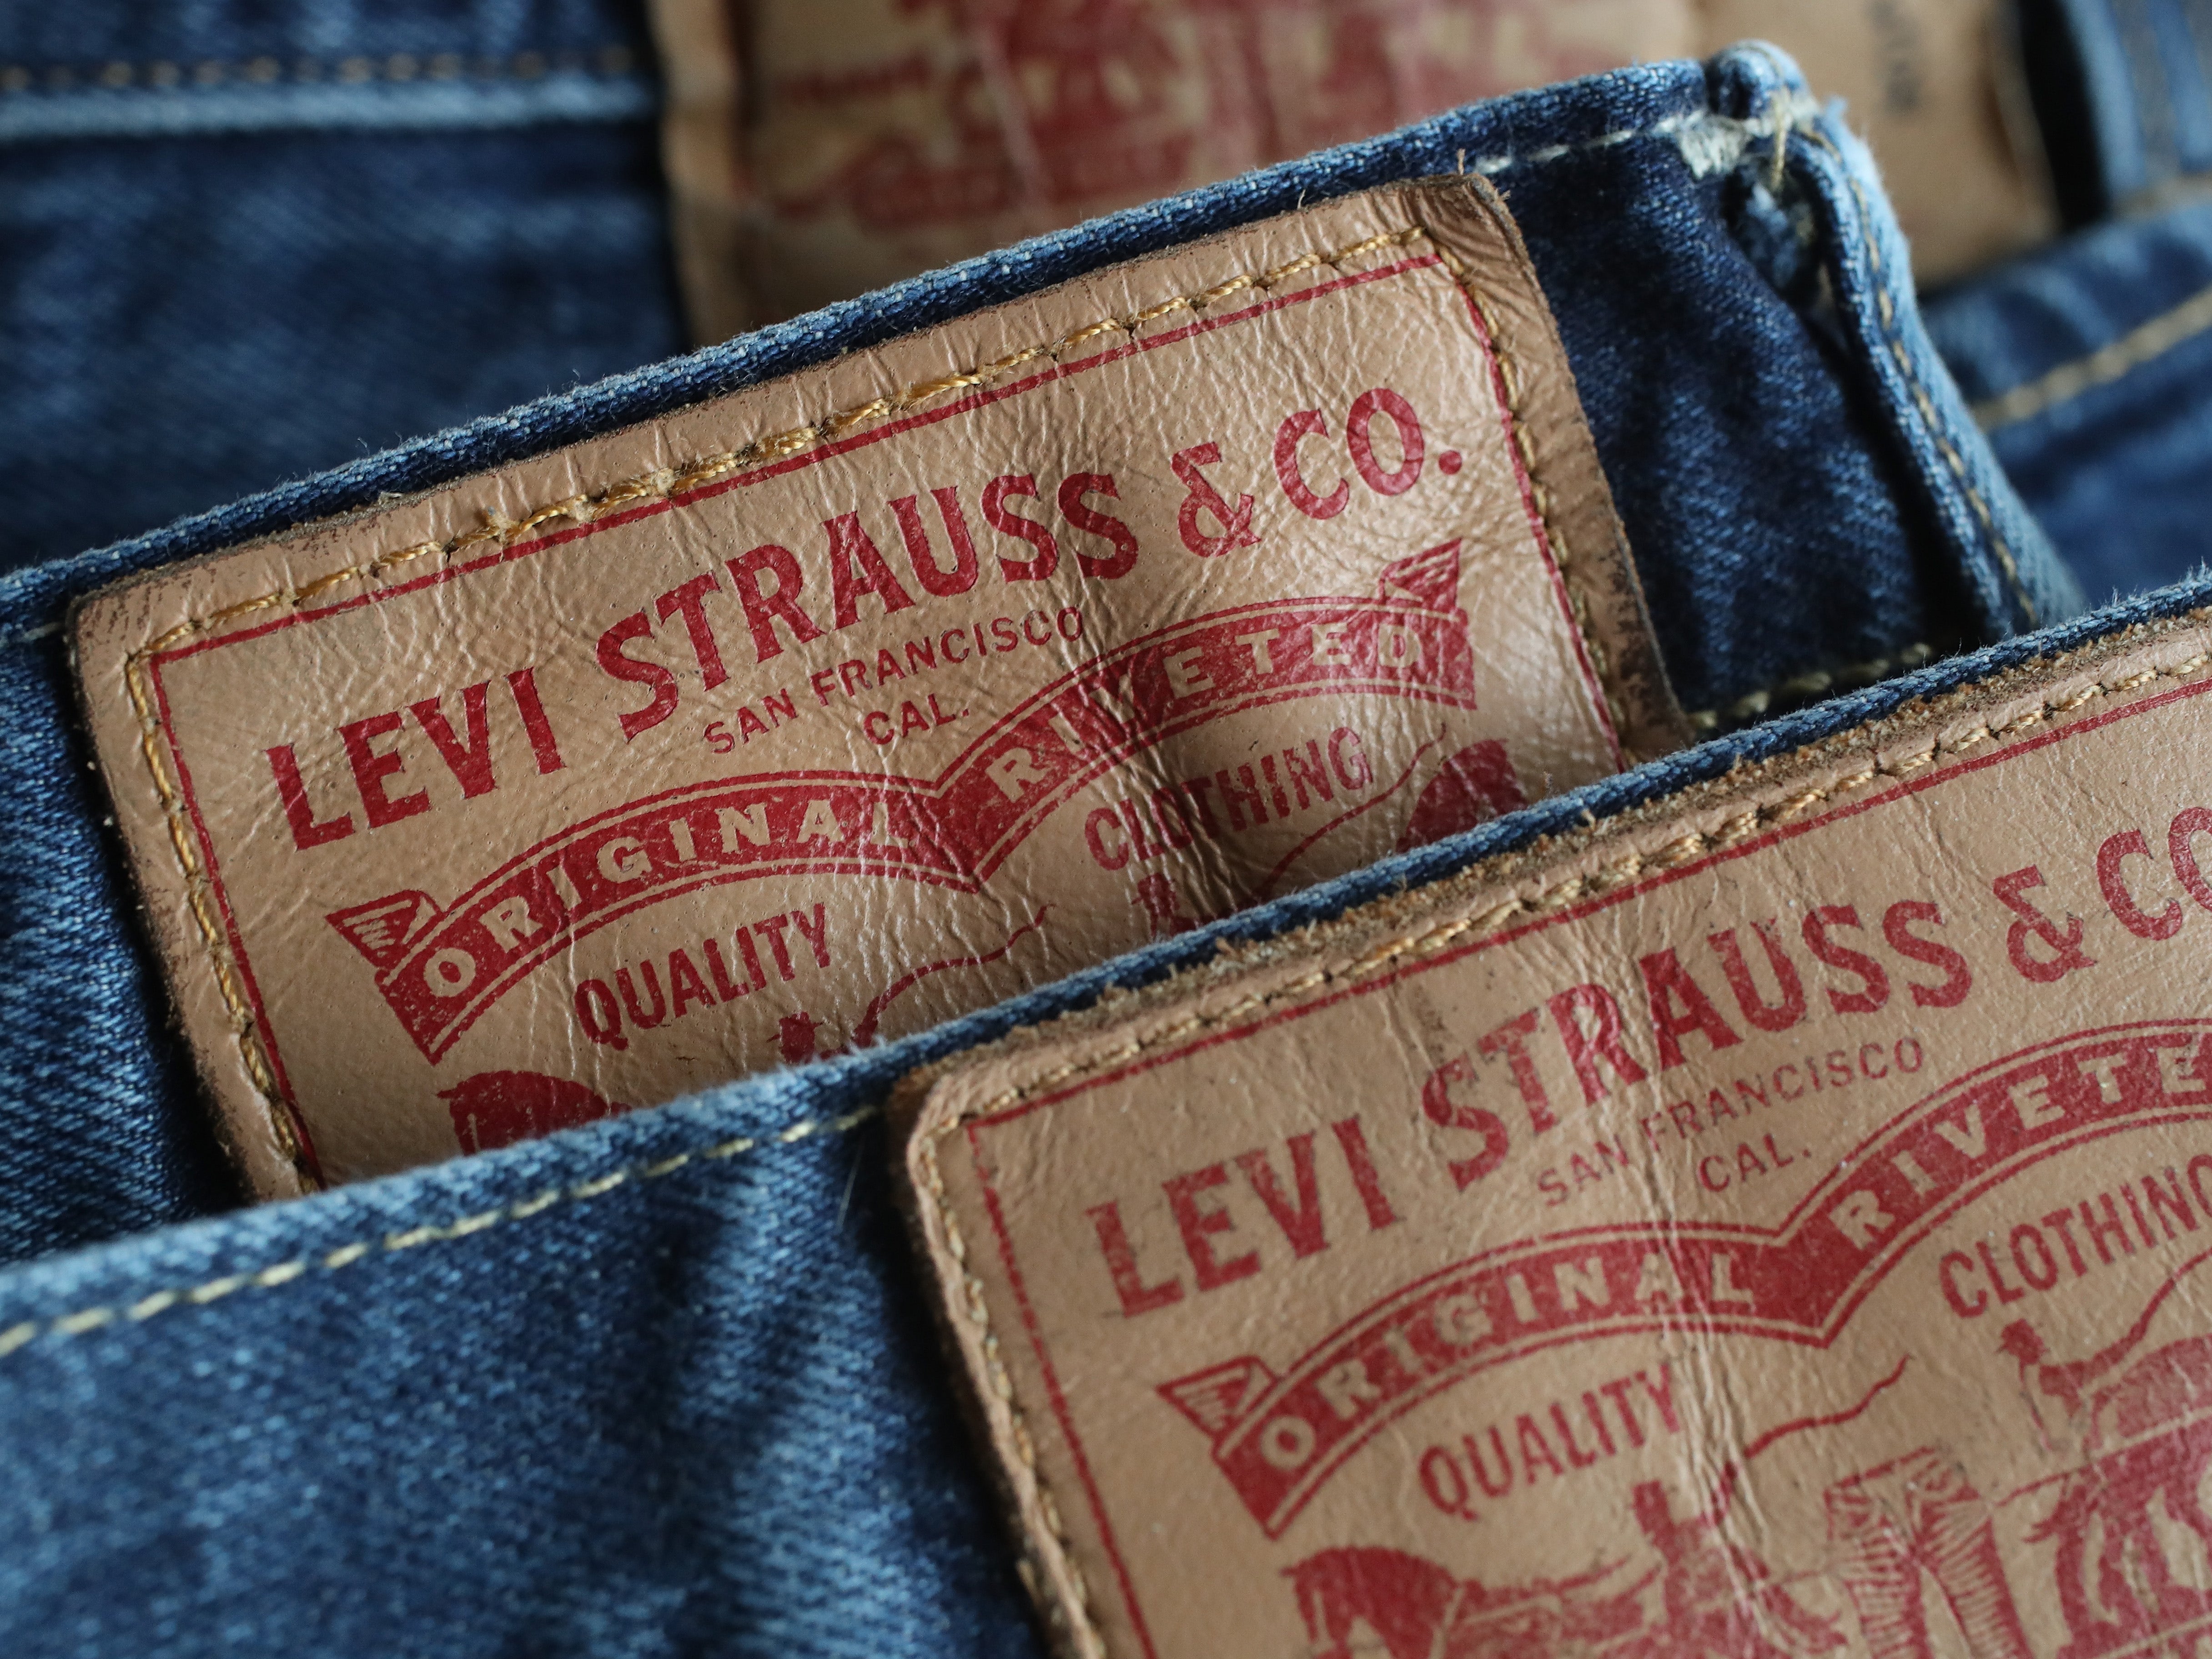 Levi Strauss loses clean sweep of bull ratings after Morgan Stanley turns  cautious | Seeking Alpha